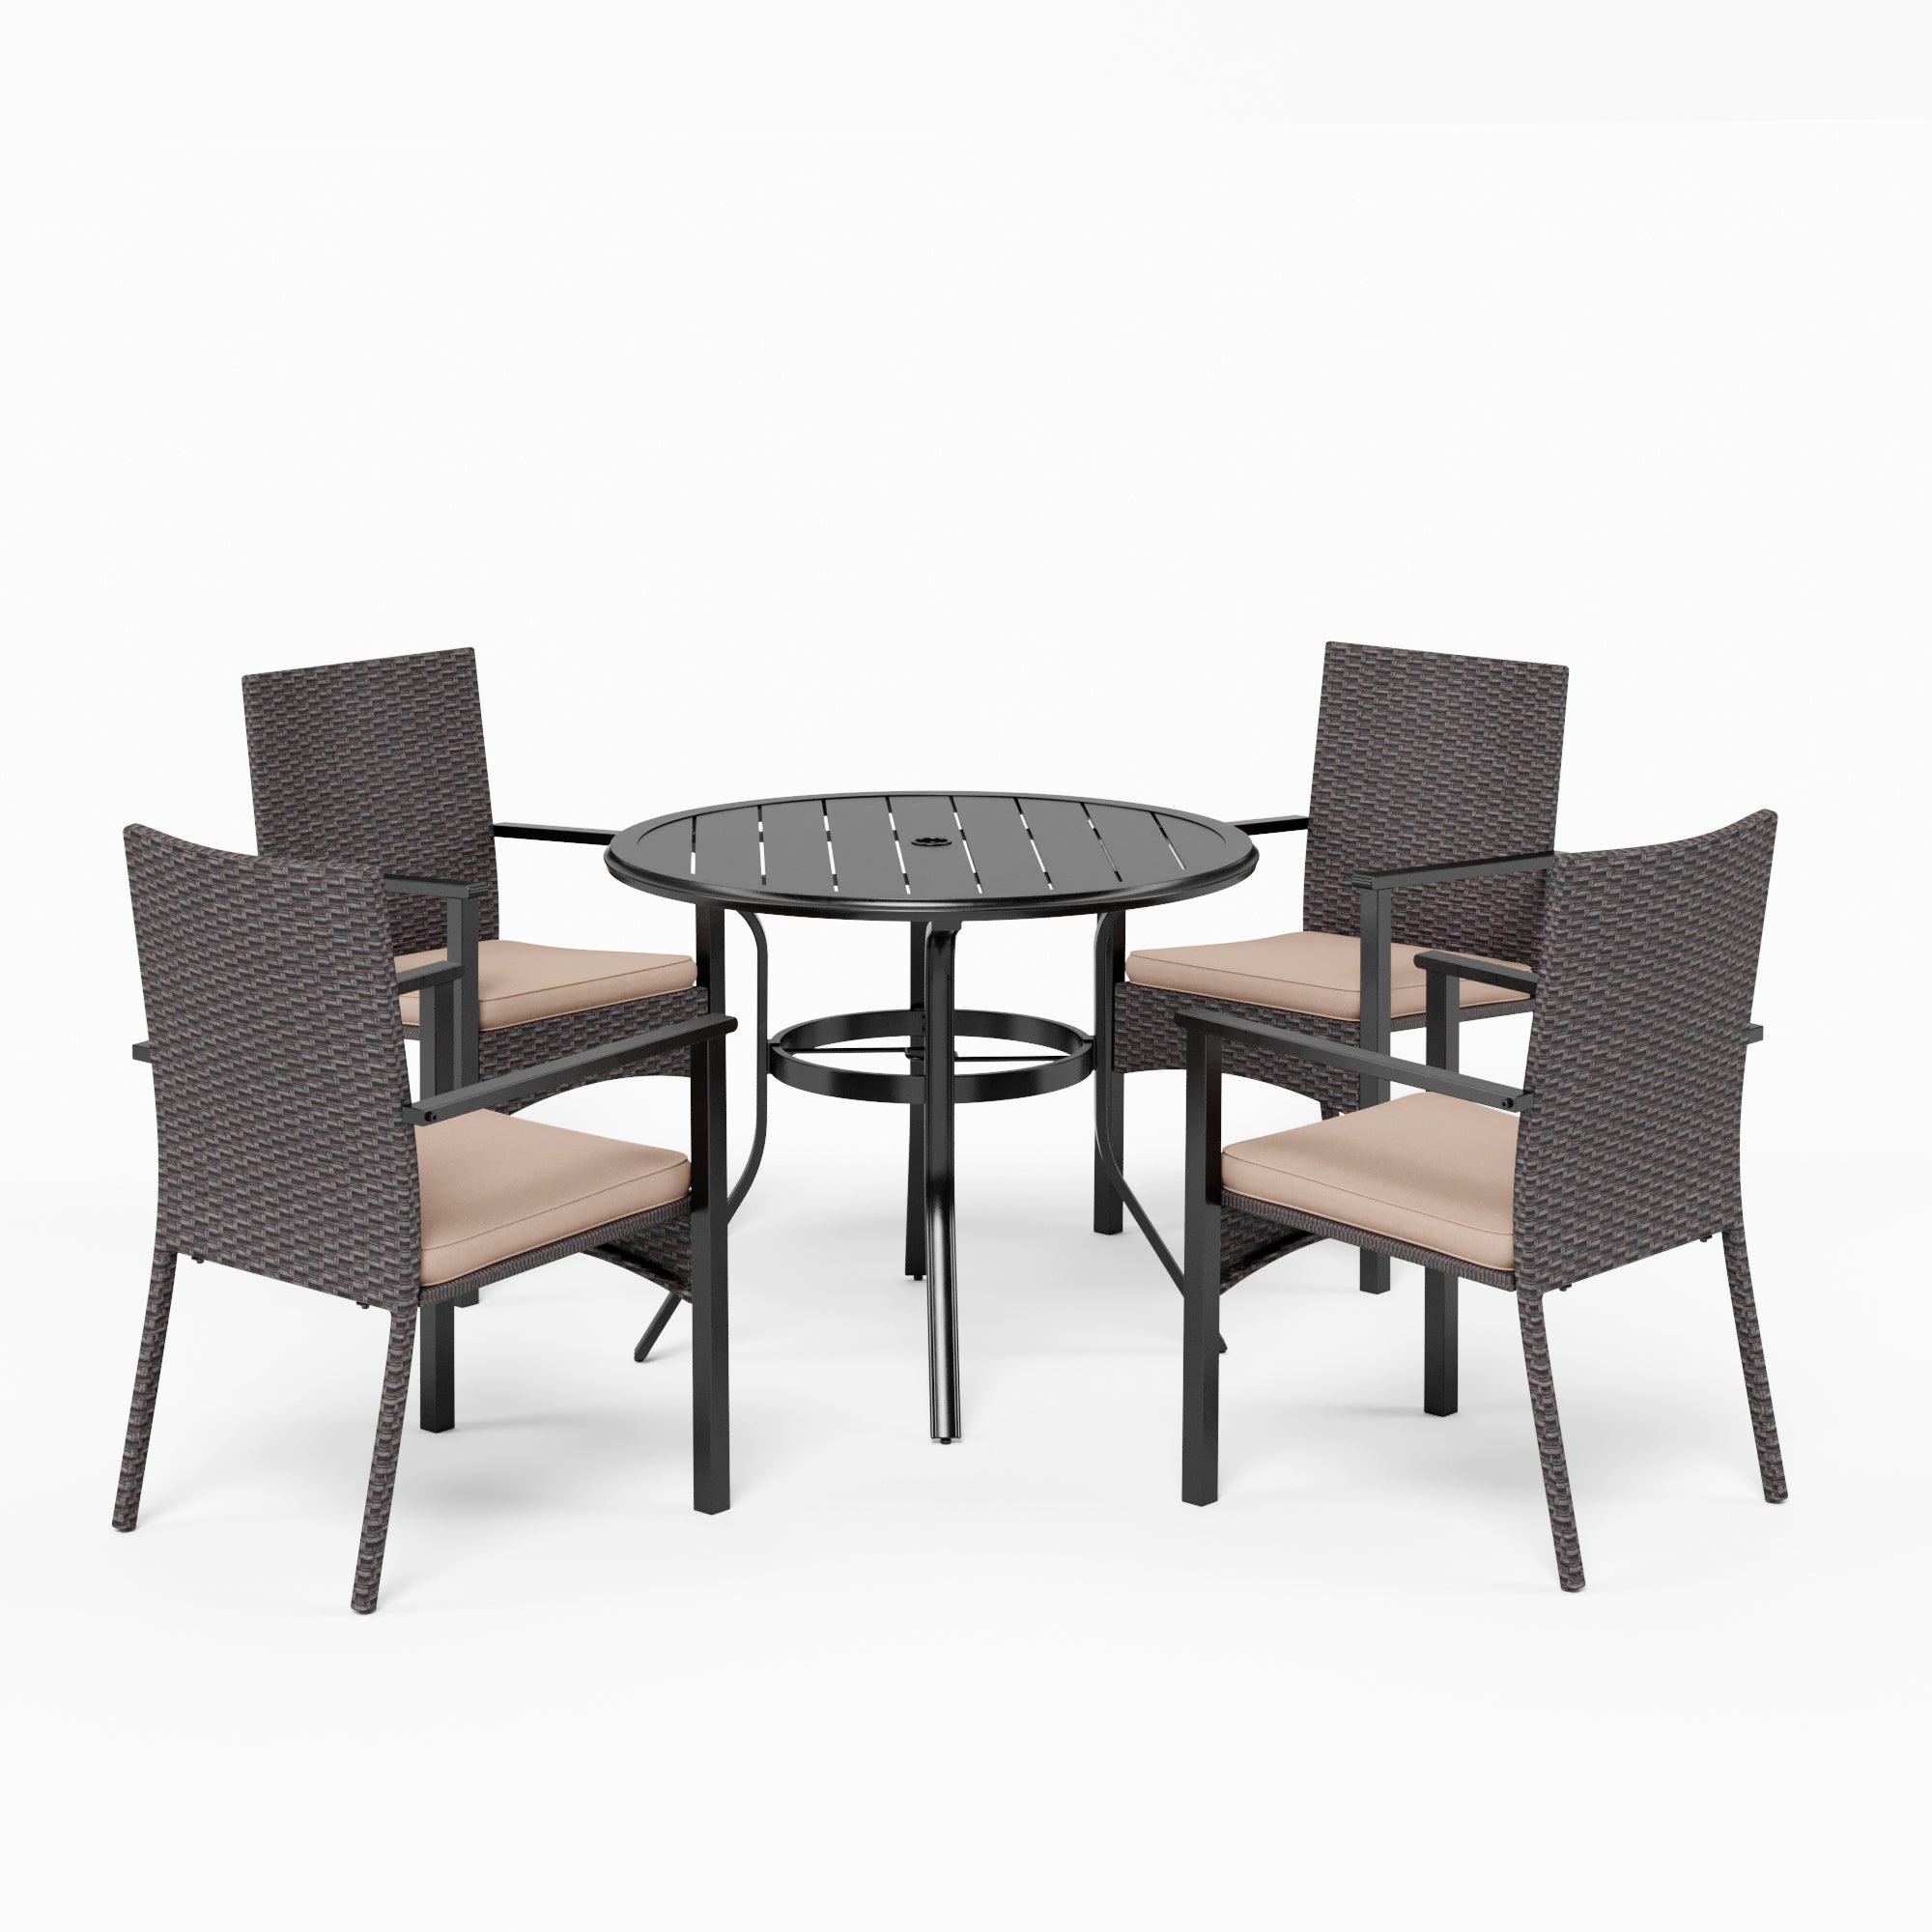 MFSTUDIO 5-Piece Round Table & Rattan Cushion Dining Chairs Outdoor Patio Dining Set